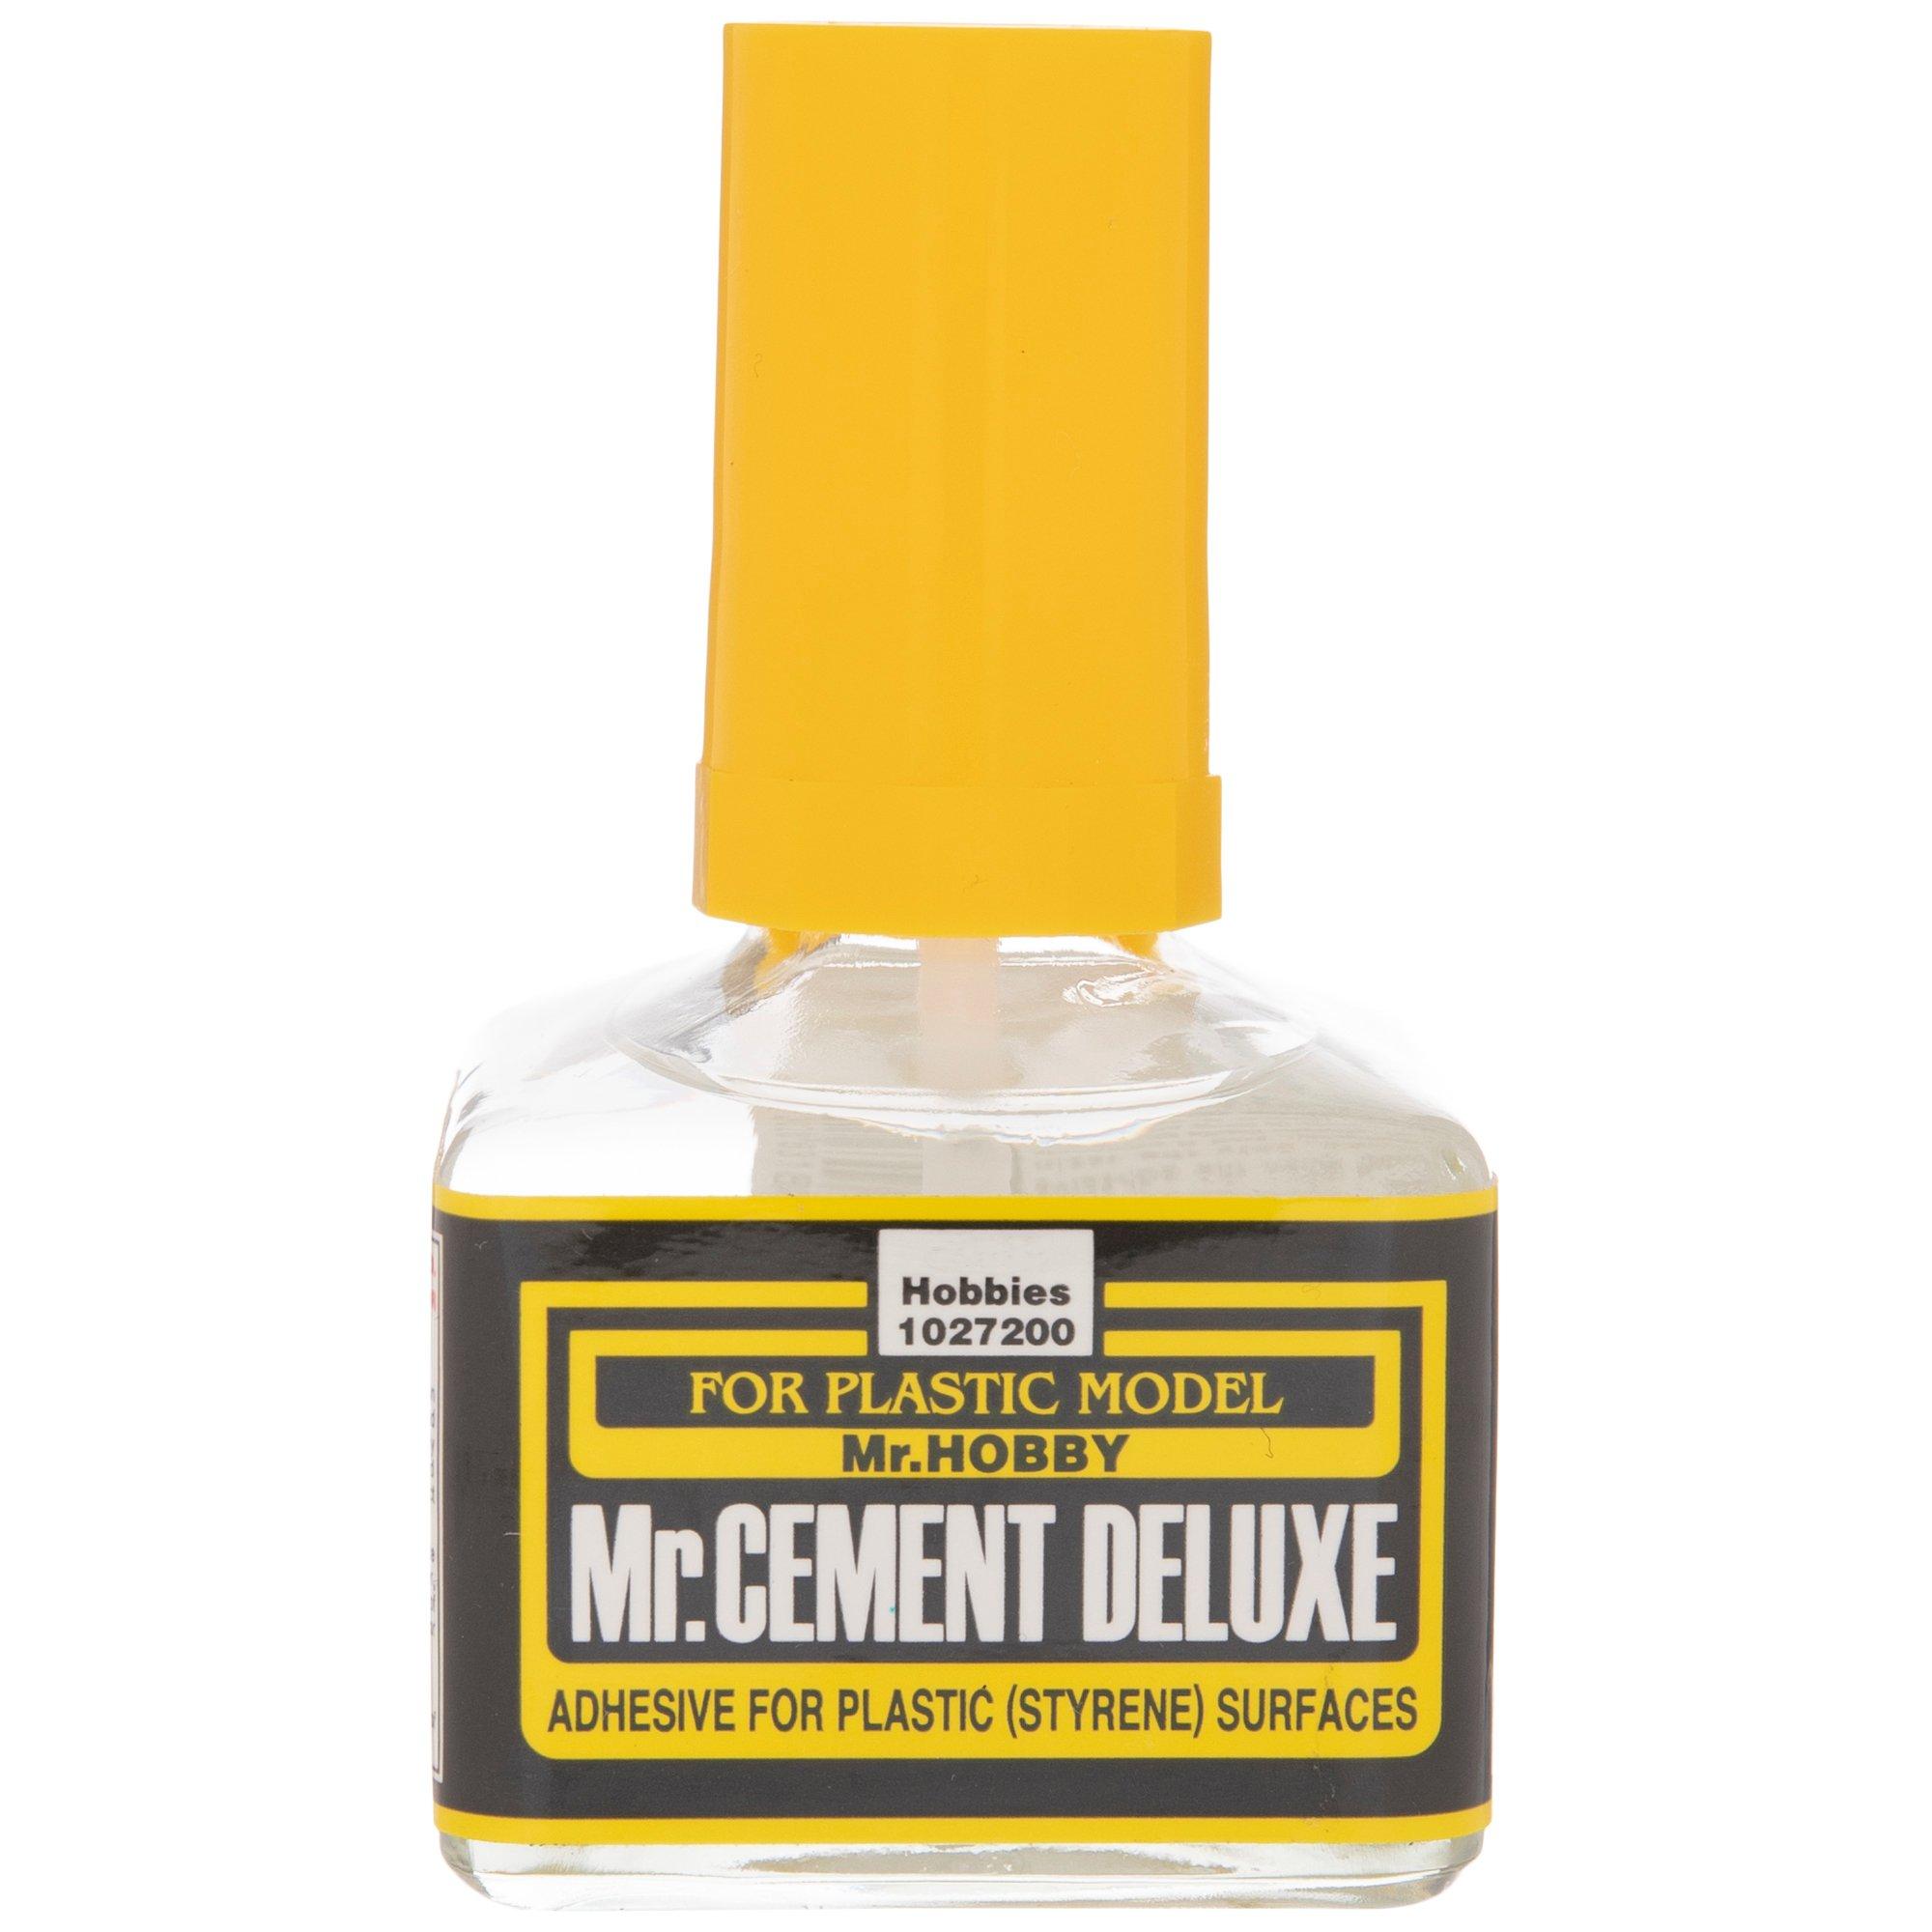 Art and Musings of a Miniature Hobbyist: Review of Mr.Cement S - A new way  of applying glue